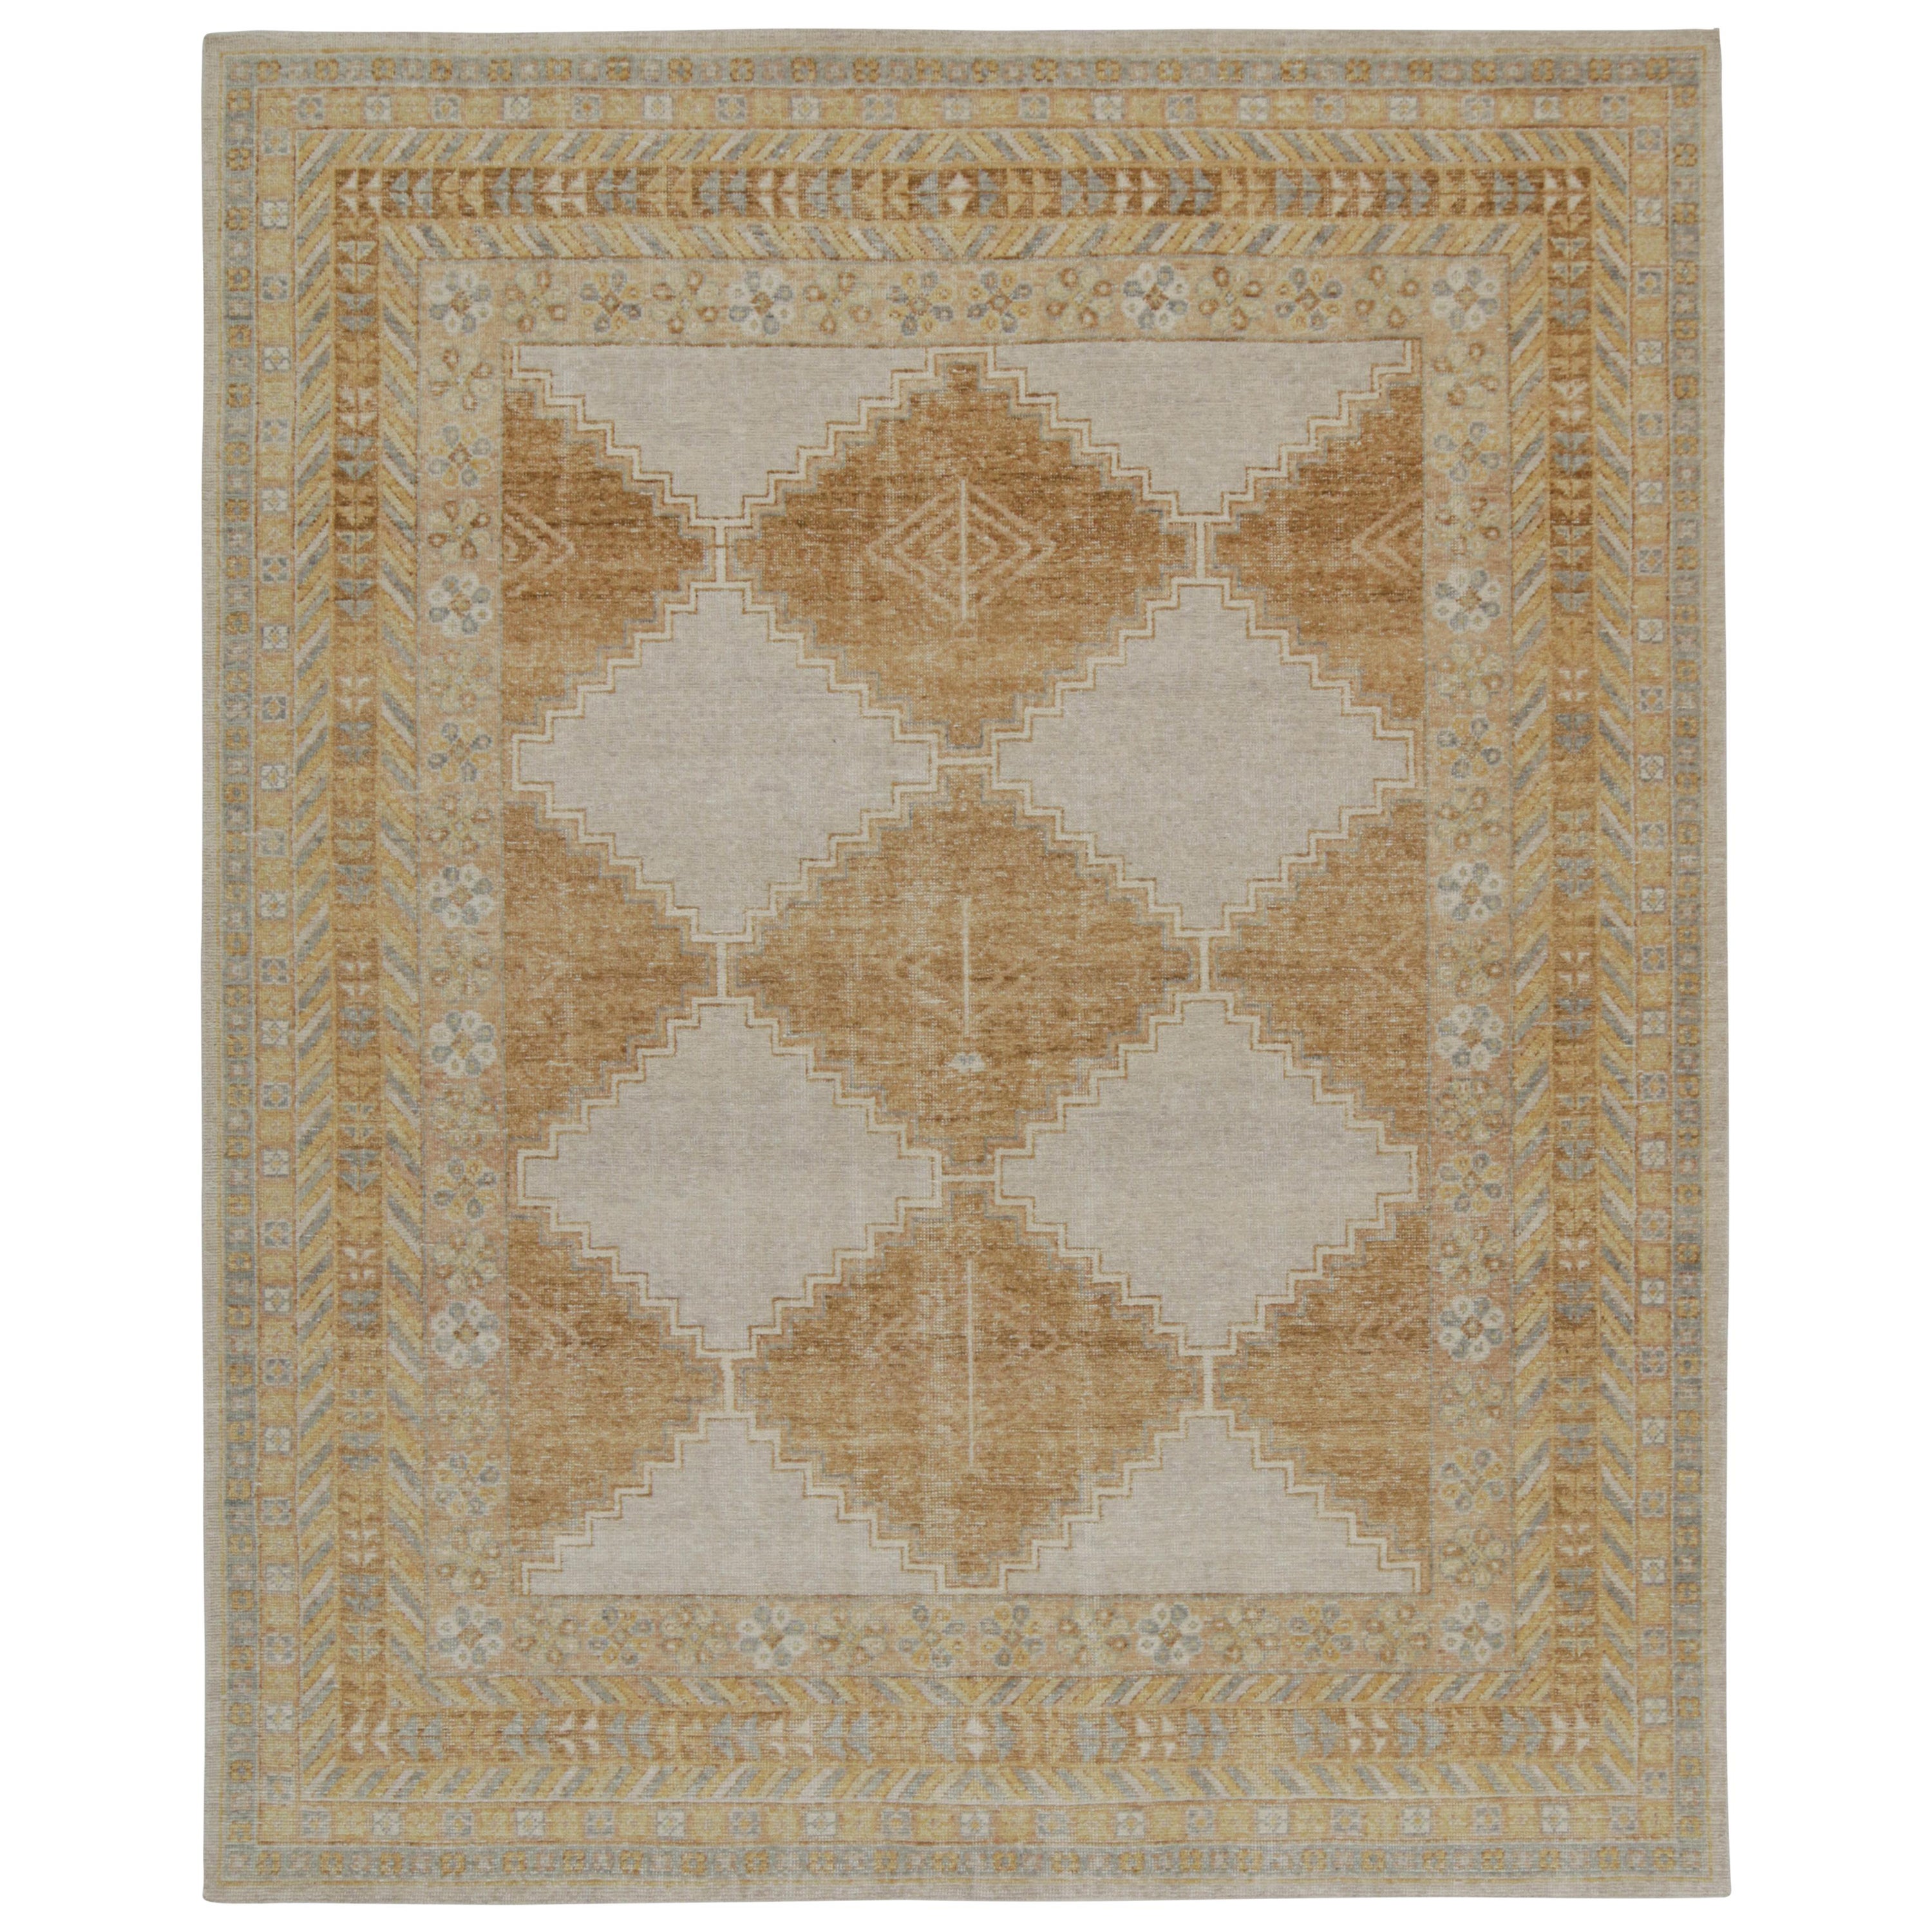 Rug & Kilim’s Distressed Tribal style rug in Gold, Gray and Blue Patterns